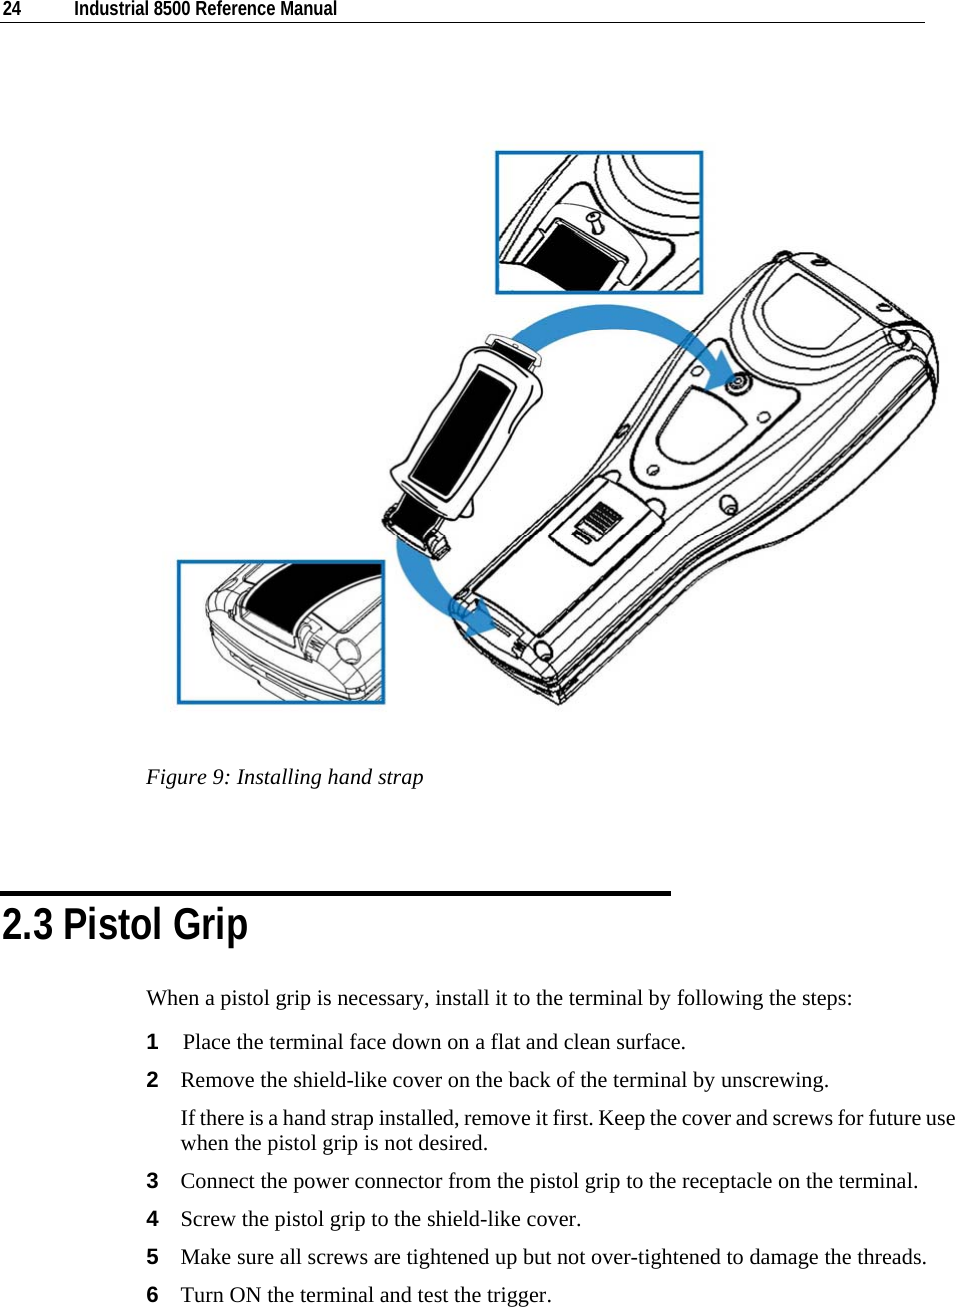  24  Industrial 8500 Reference Manual    Figure 9: Installing hand strap   2.3 Pistol Grip When a pistol grip is necessary, install it to the terminal by following the steps: 1  Place the terminal face down on a flat and clean surface.  2  Remove the shield-like cover on the back of the terminal by unscrewing.  If there is a hand strap installed, remove it first. Keep the cover and screws for future use when the pistol grip is not desired. 3  Connect the power connector from the pistol grip to the receptacle on the terminal. 4  Screw the pistol grip to the shield-like cover. 5  Make sure all screws are tightened up but not over-tightened to damage the threads. 6  Turn ON the terminal and test the trigger. 